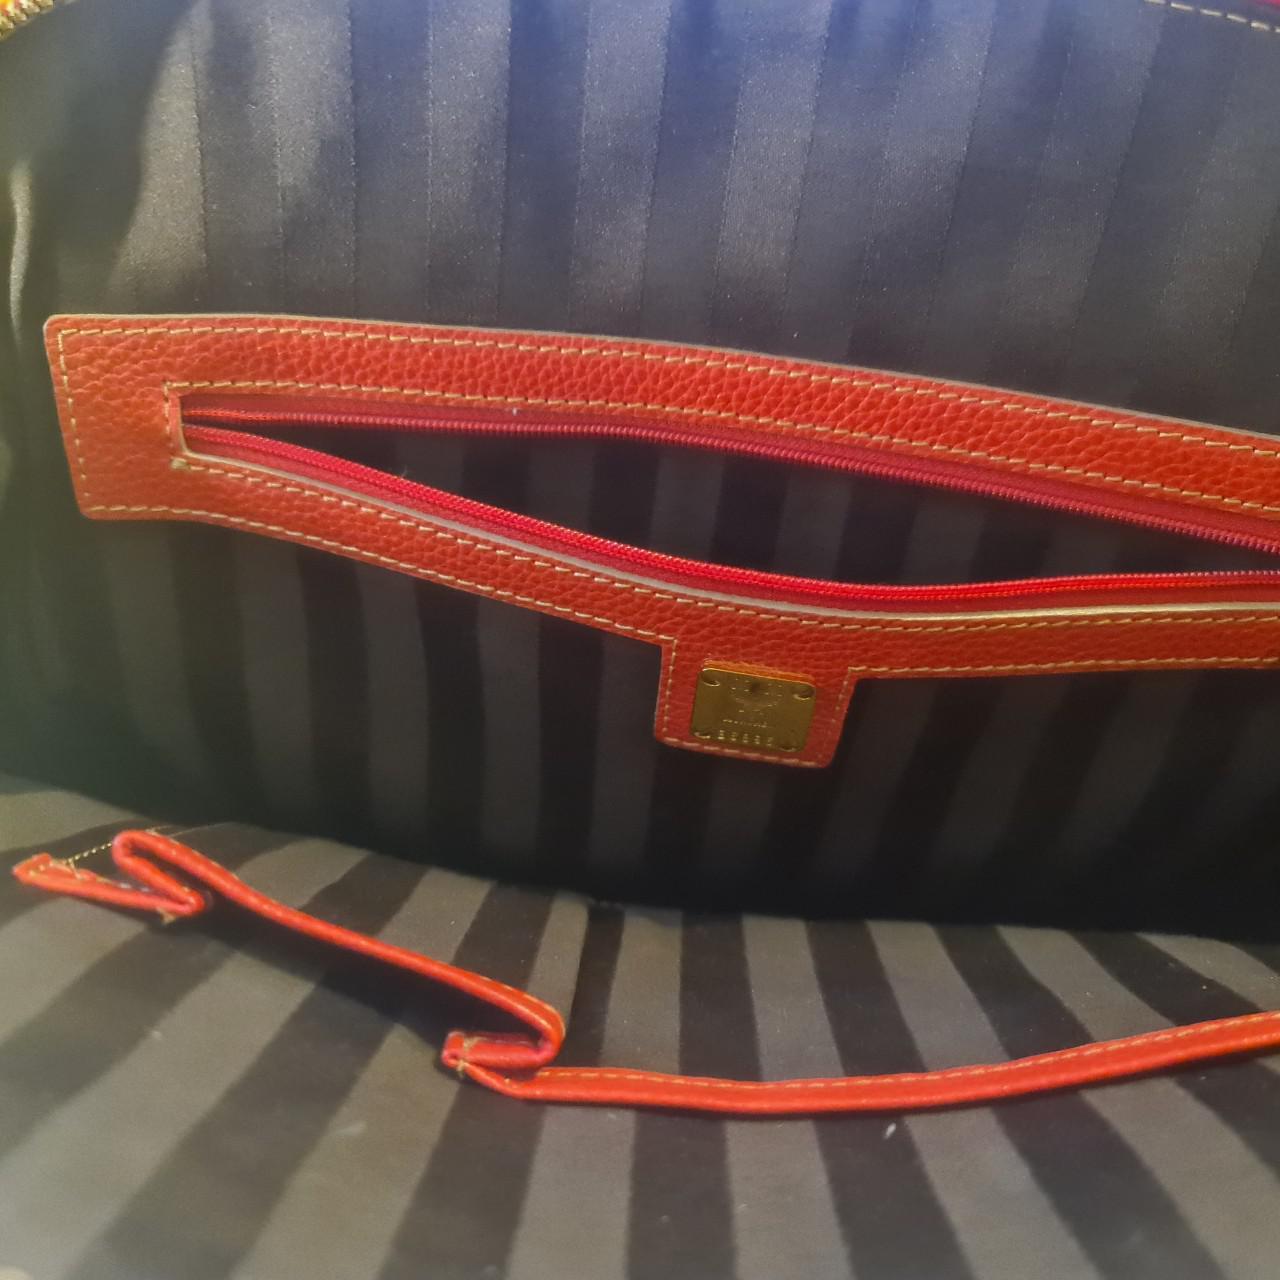 Gorgeous MCM bag in red. Authentic 100%. - Depop